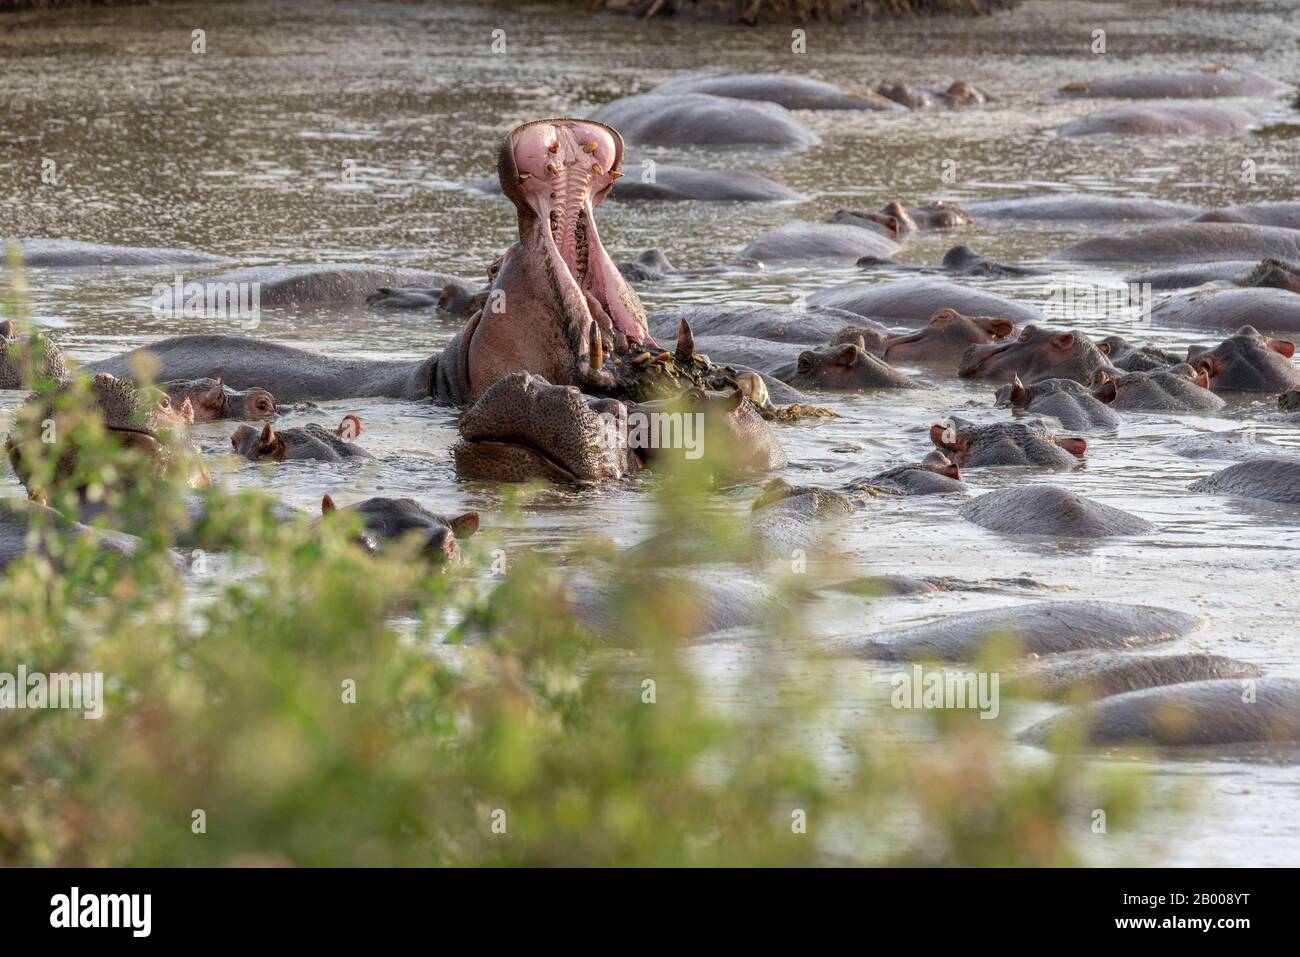 Hippopotamus with mouth wide open, in the Serengeti National Park Stock Photo